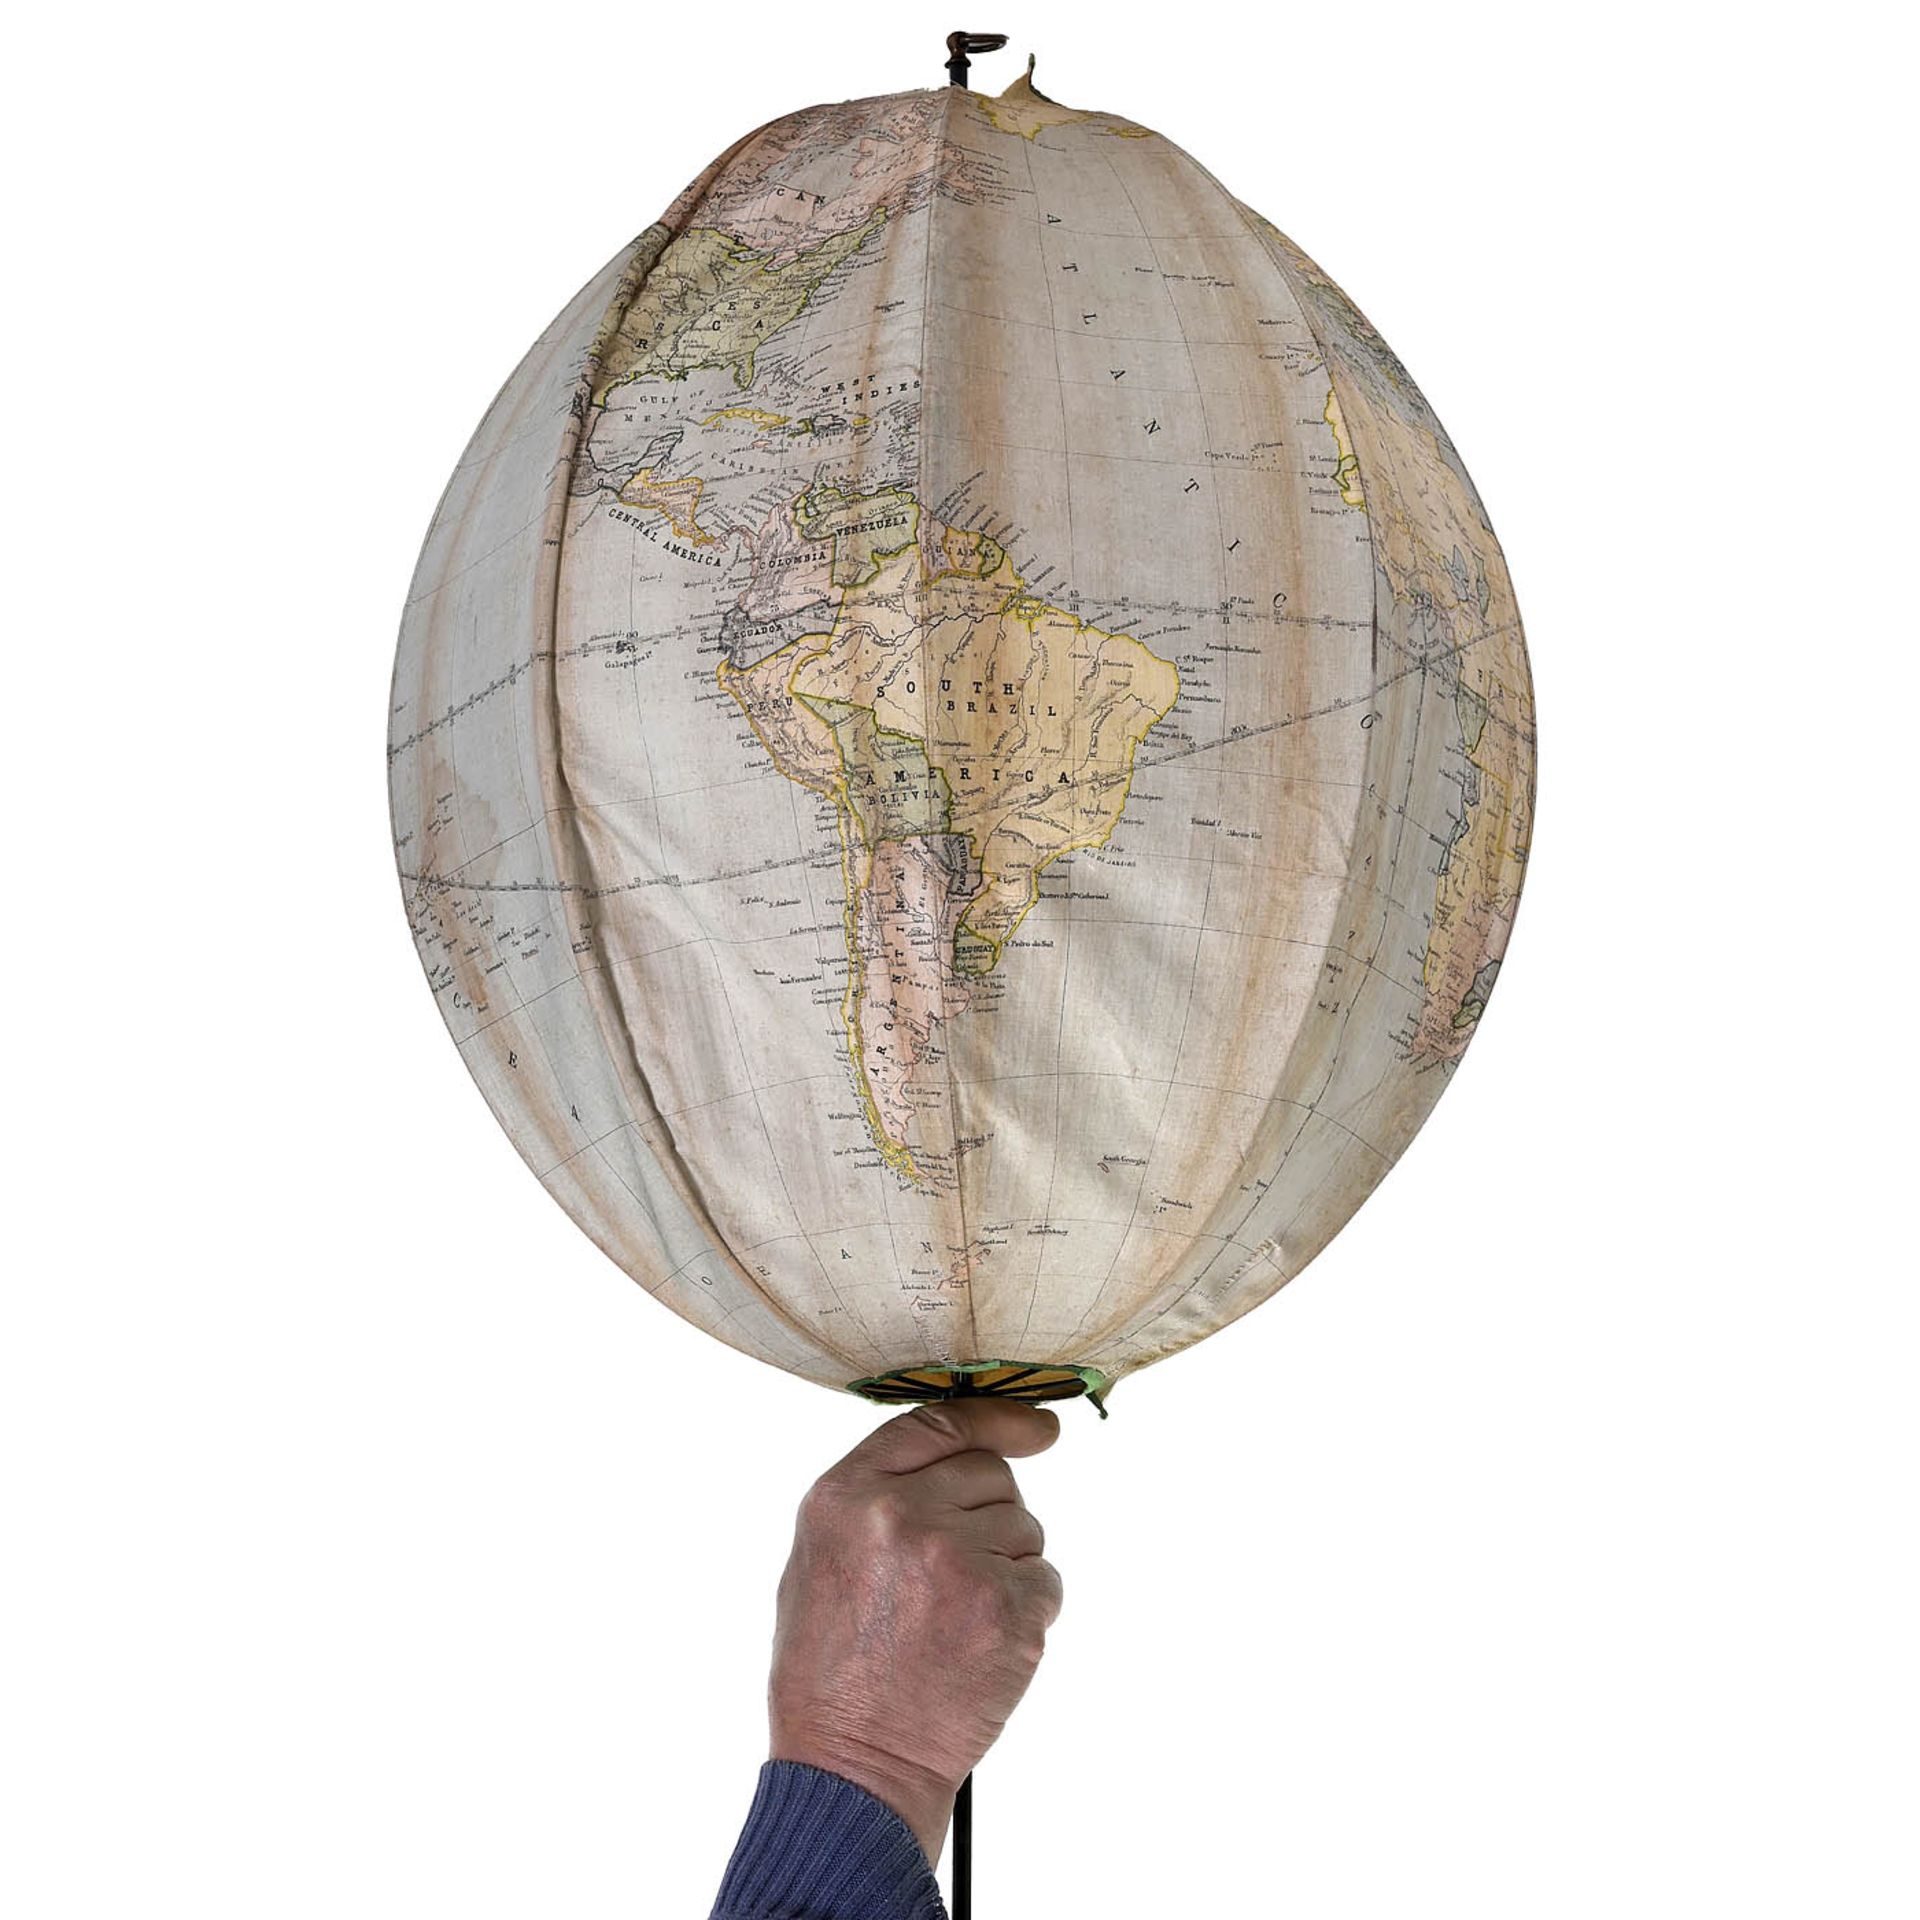 Bett's 16-Inch Collapsible Terrestrial Globe, c. 1880 - Image 4 of 5